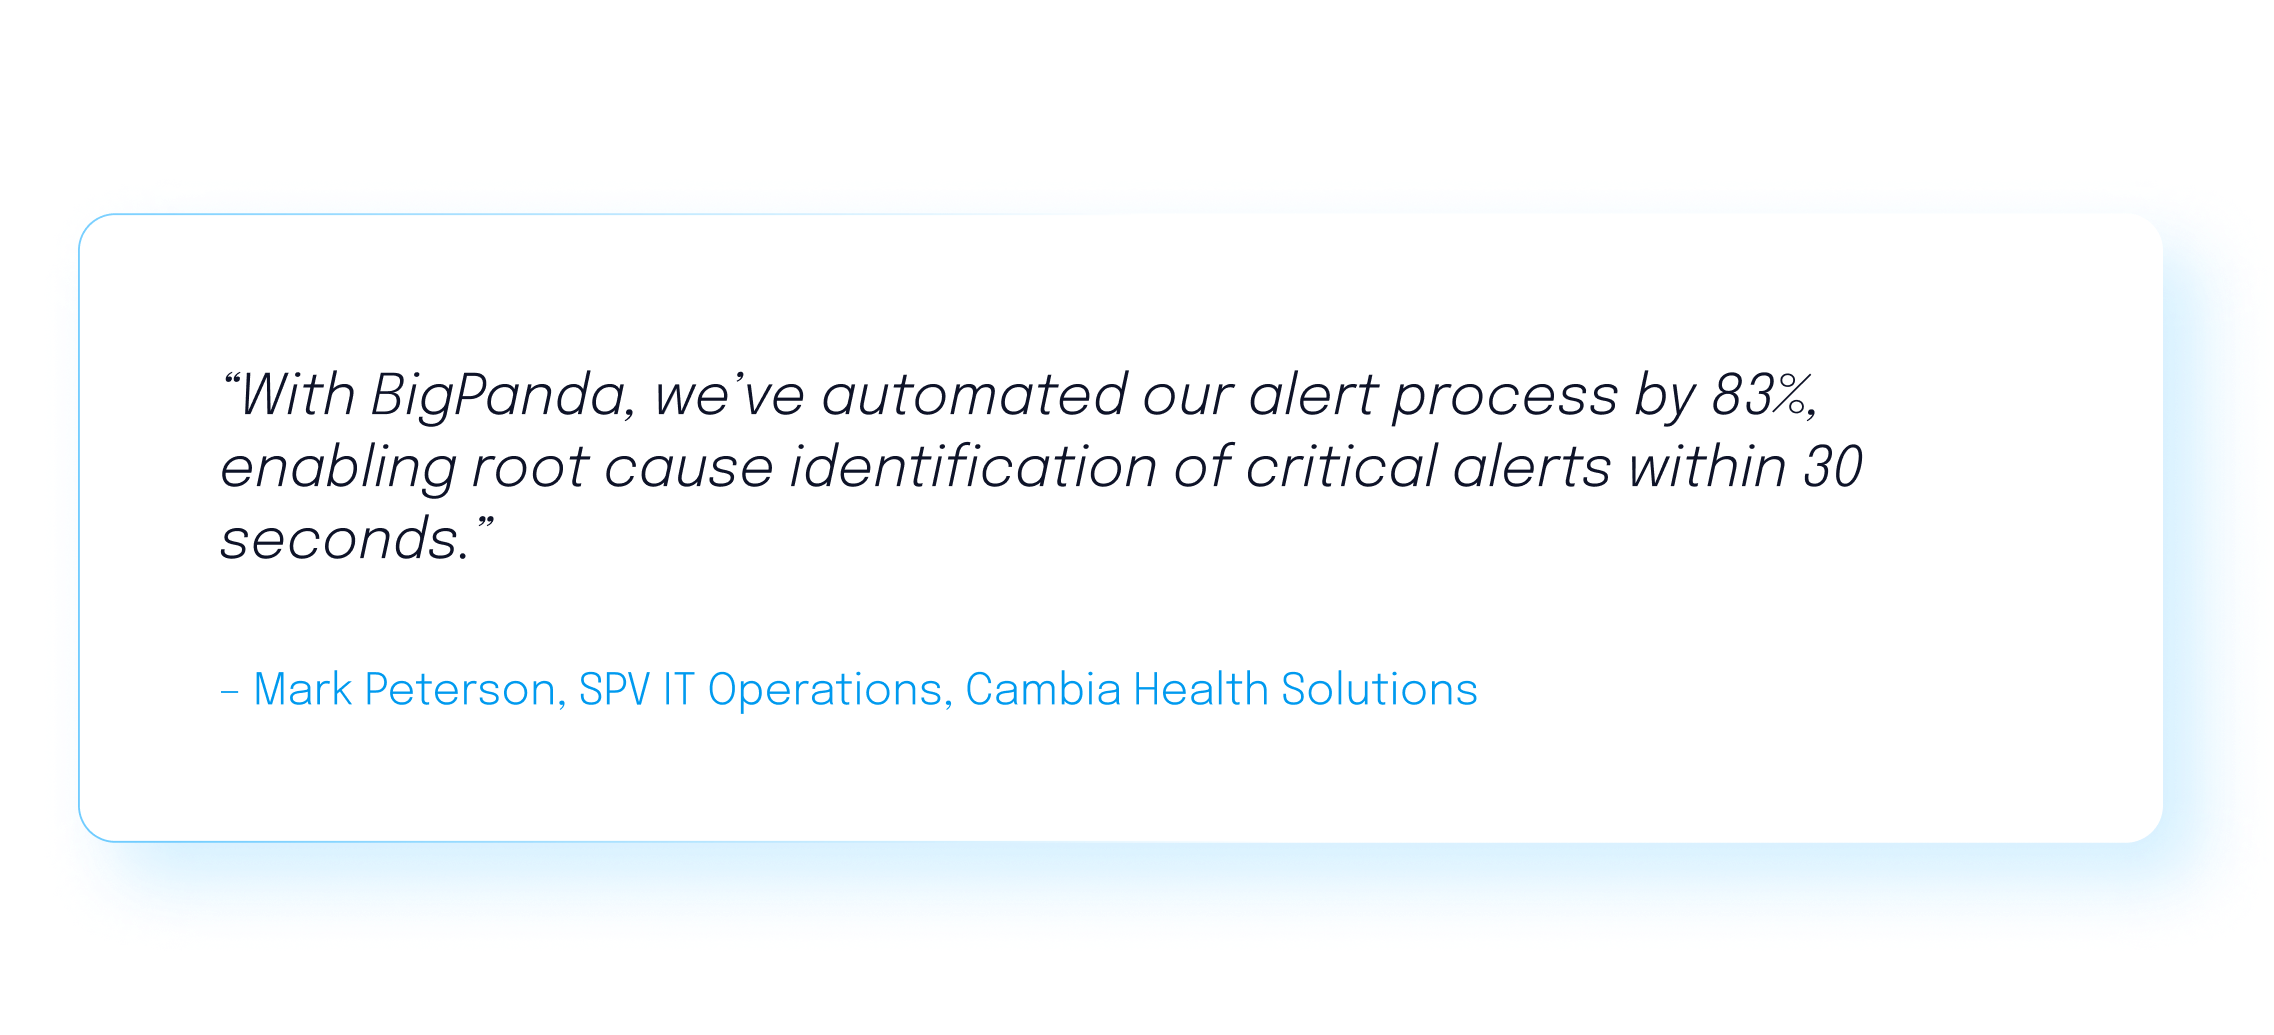 Customer quote: "With BigPanda, we've automated our alert process by 83%, enabling root cause identification of critical alerts within 30 seconds." Mark Peterson, SPV ITOps, Cambia Health Solutions